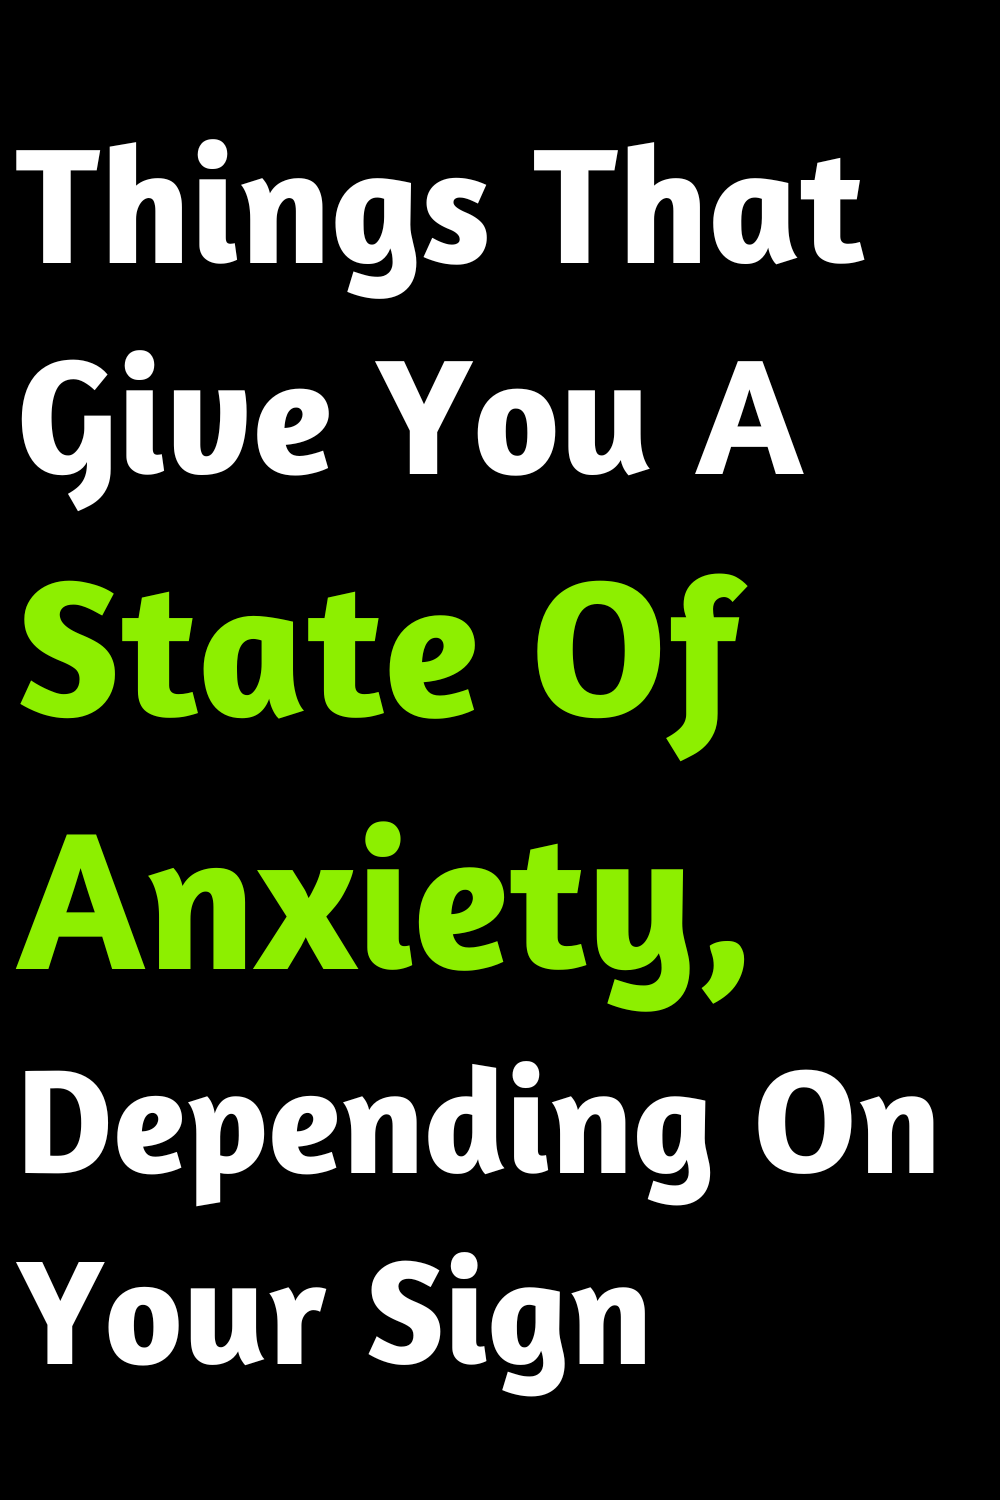 Things That Give You A State Of Anxiety, Depending On Your Sign